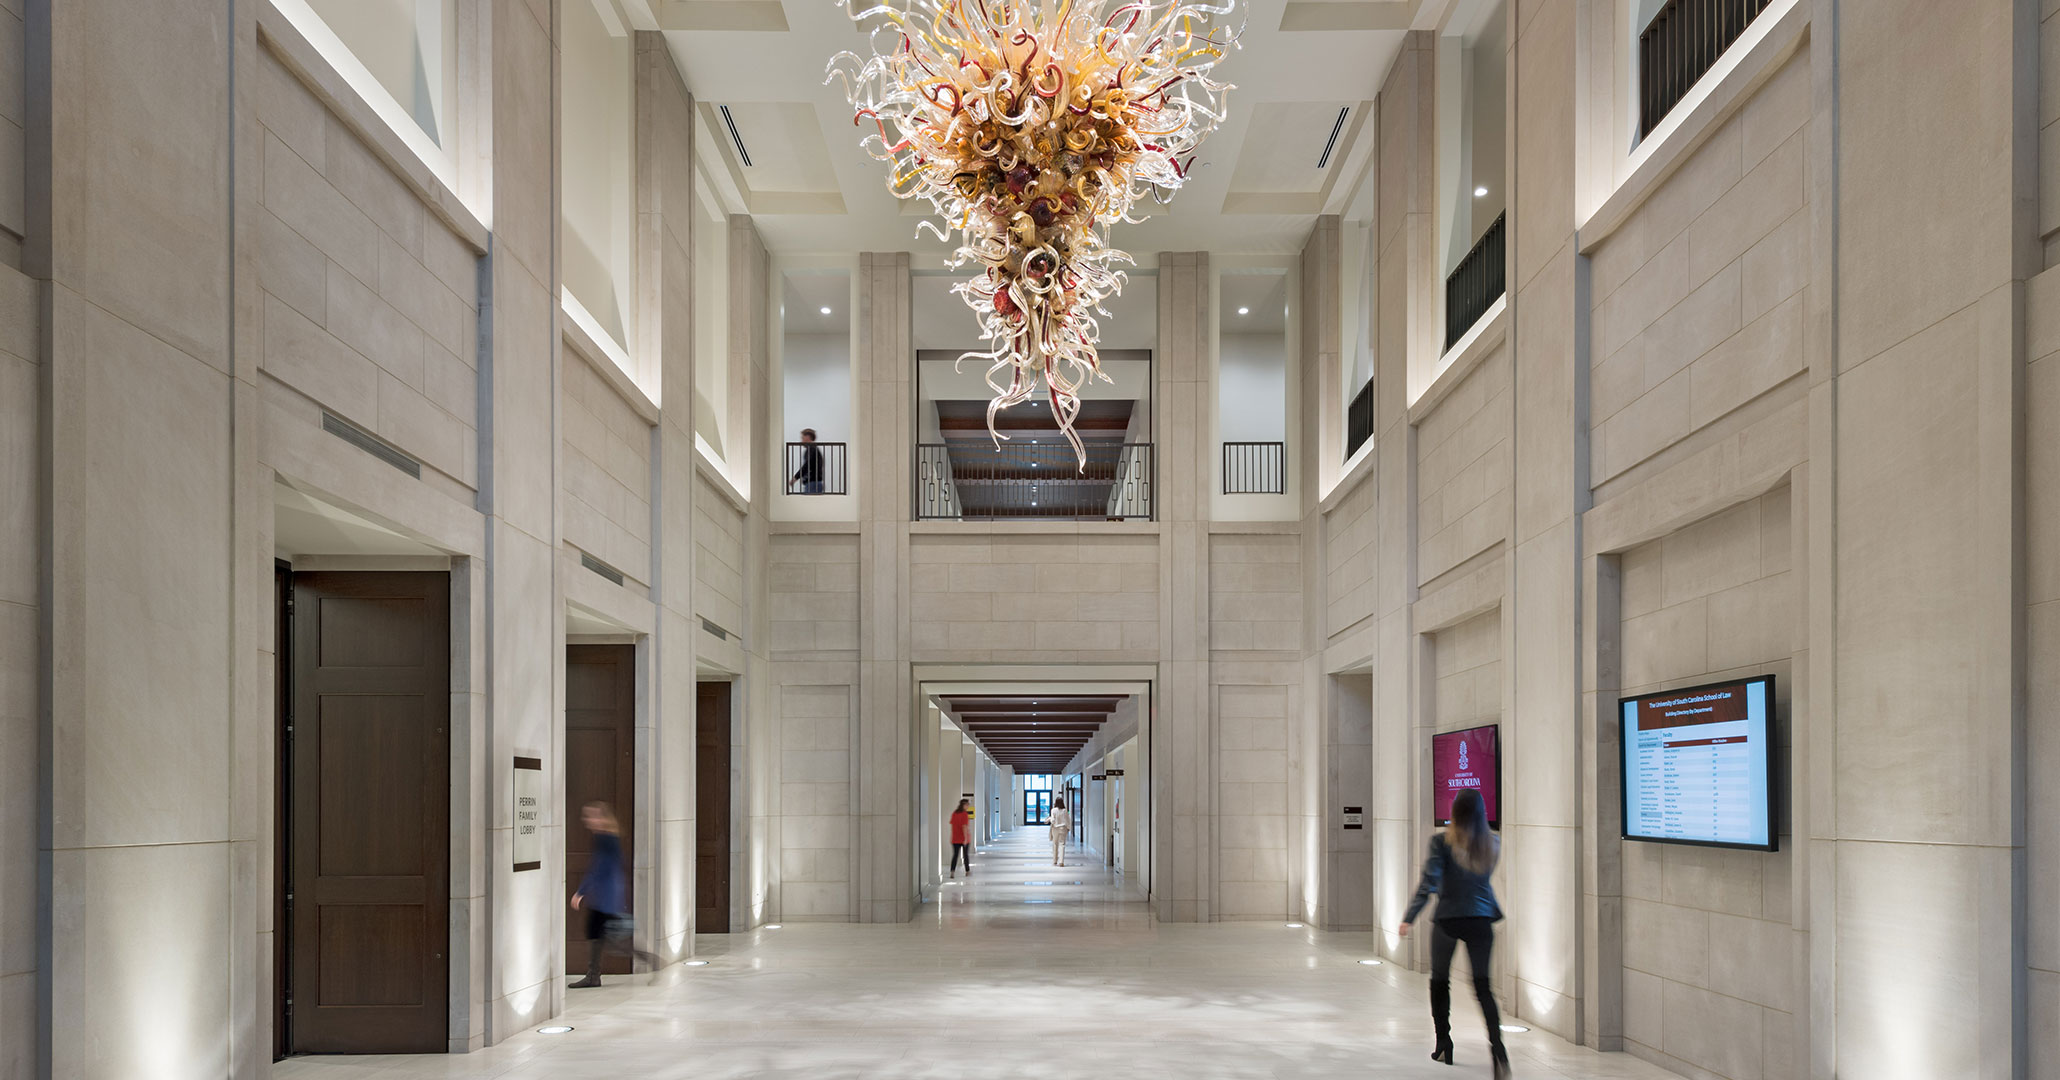 Boudreaux architects designed the new Law School with a glass sculpture made by Chihuly.